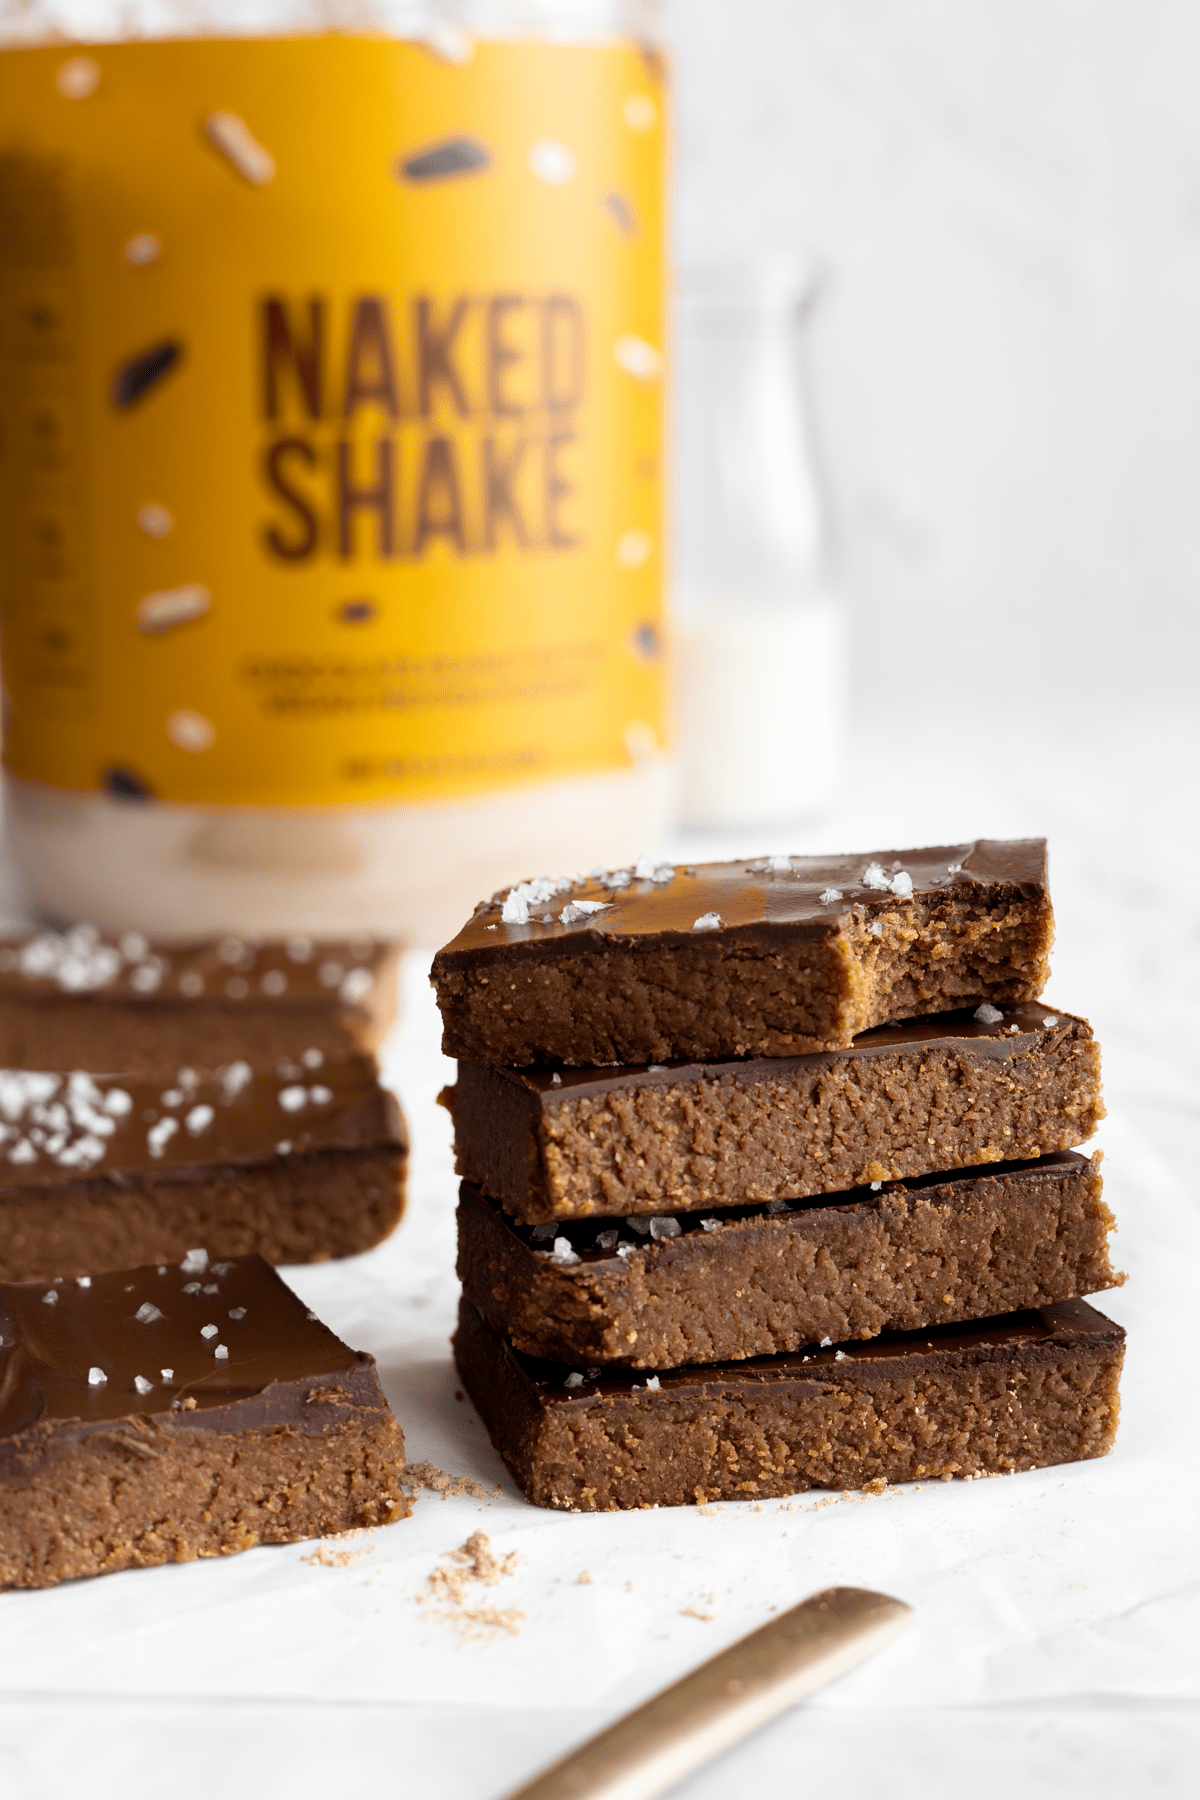 chocolate peanut butter bars stacked on top of each other with naked shake in background